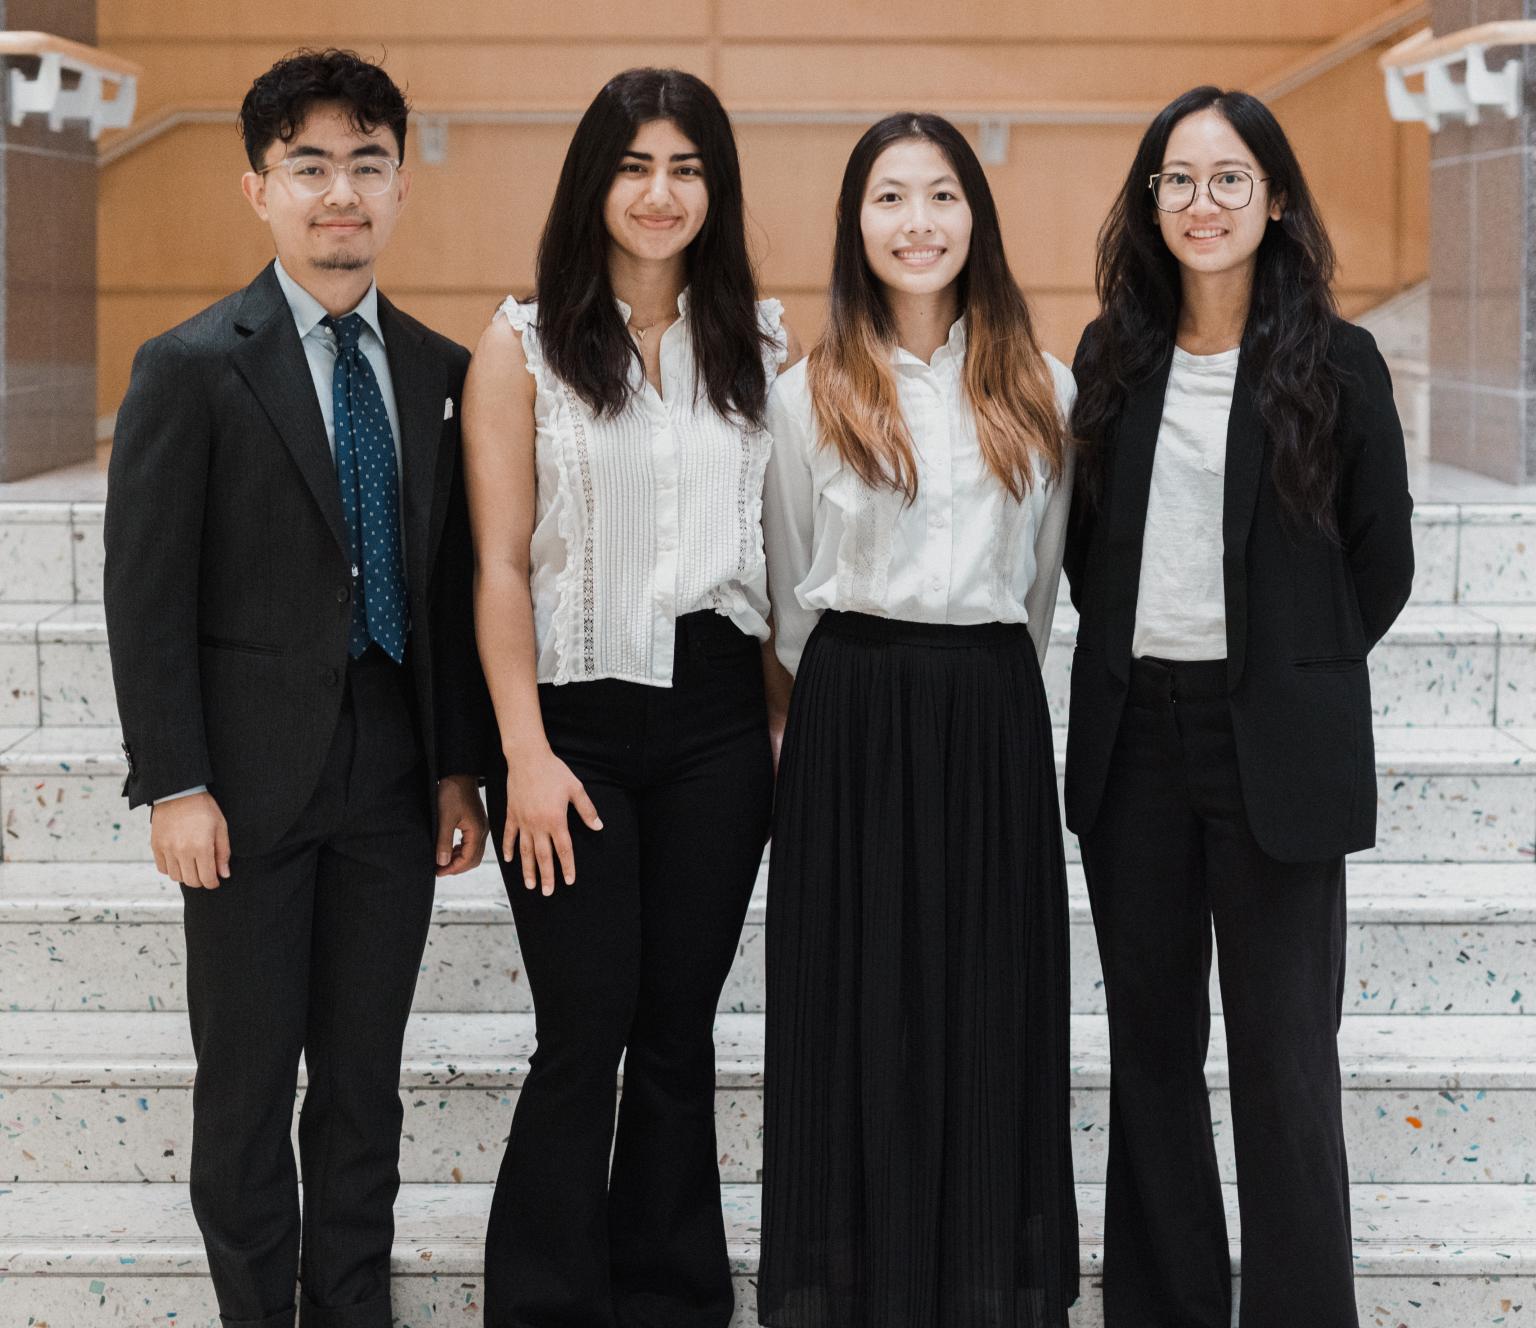 Class of 2026 Dental Student Research Fellows of 2022